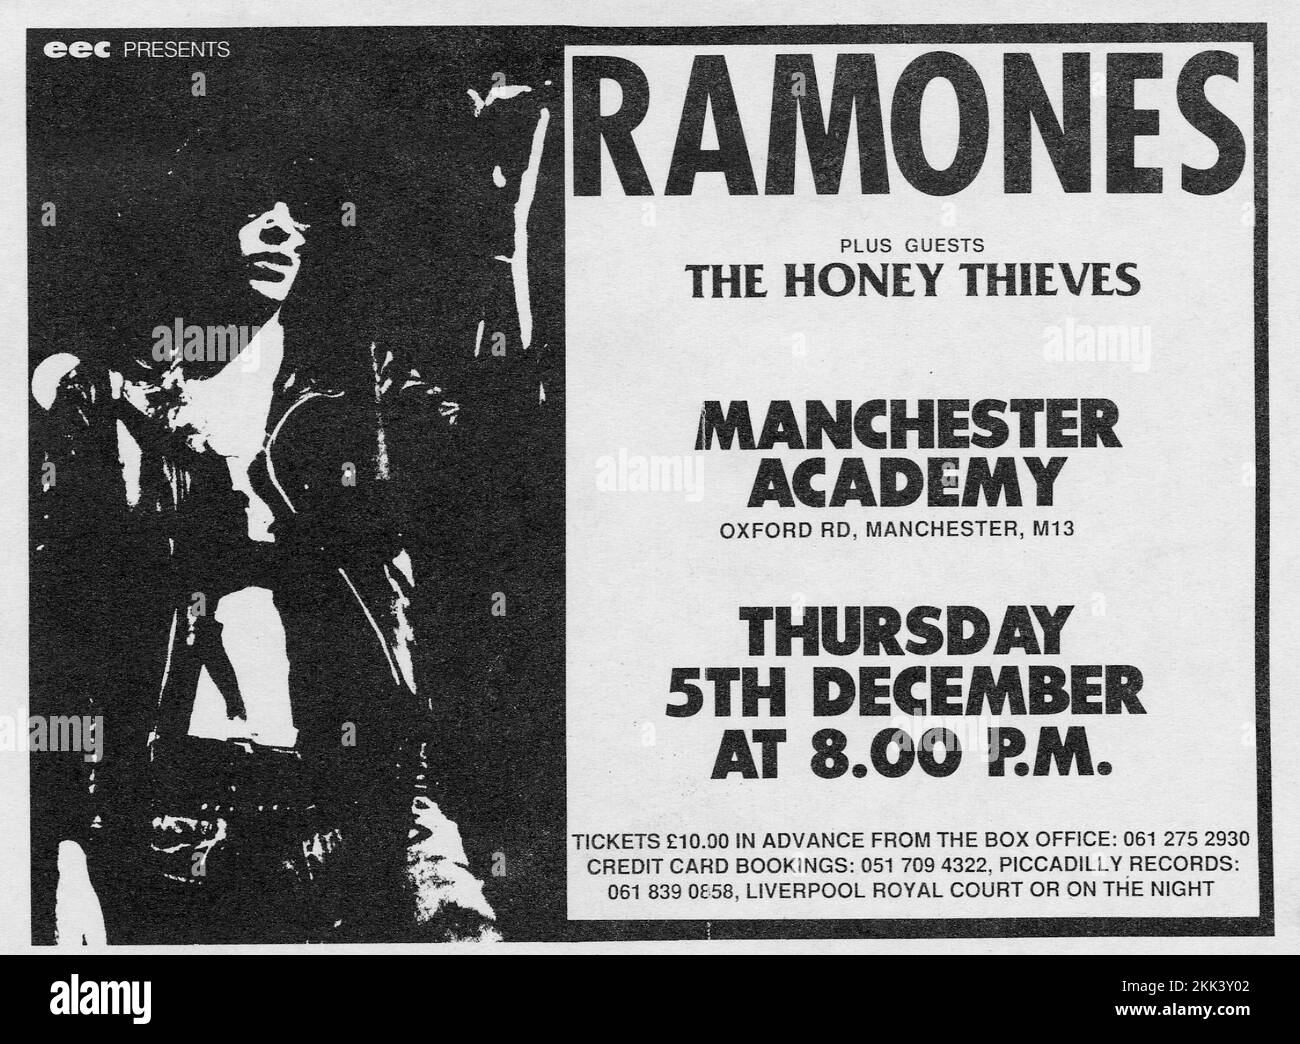 The Ramones, concert flyer.  Manchester Academy Oxford Road December 5th 1985. Support The Honey Thieves. Tickets £10 from Piccadilly Records.  Although The Ramones were by this time struggling to sell lots of records they still had a good hard core following to support touring, as well as new generation of kids curious to see a Punk legend. Stock Photo